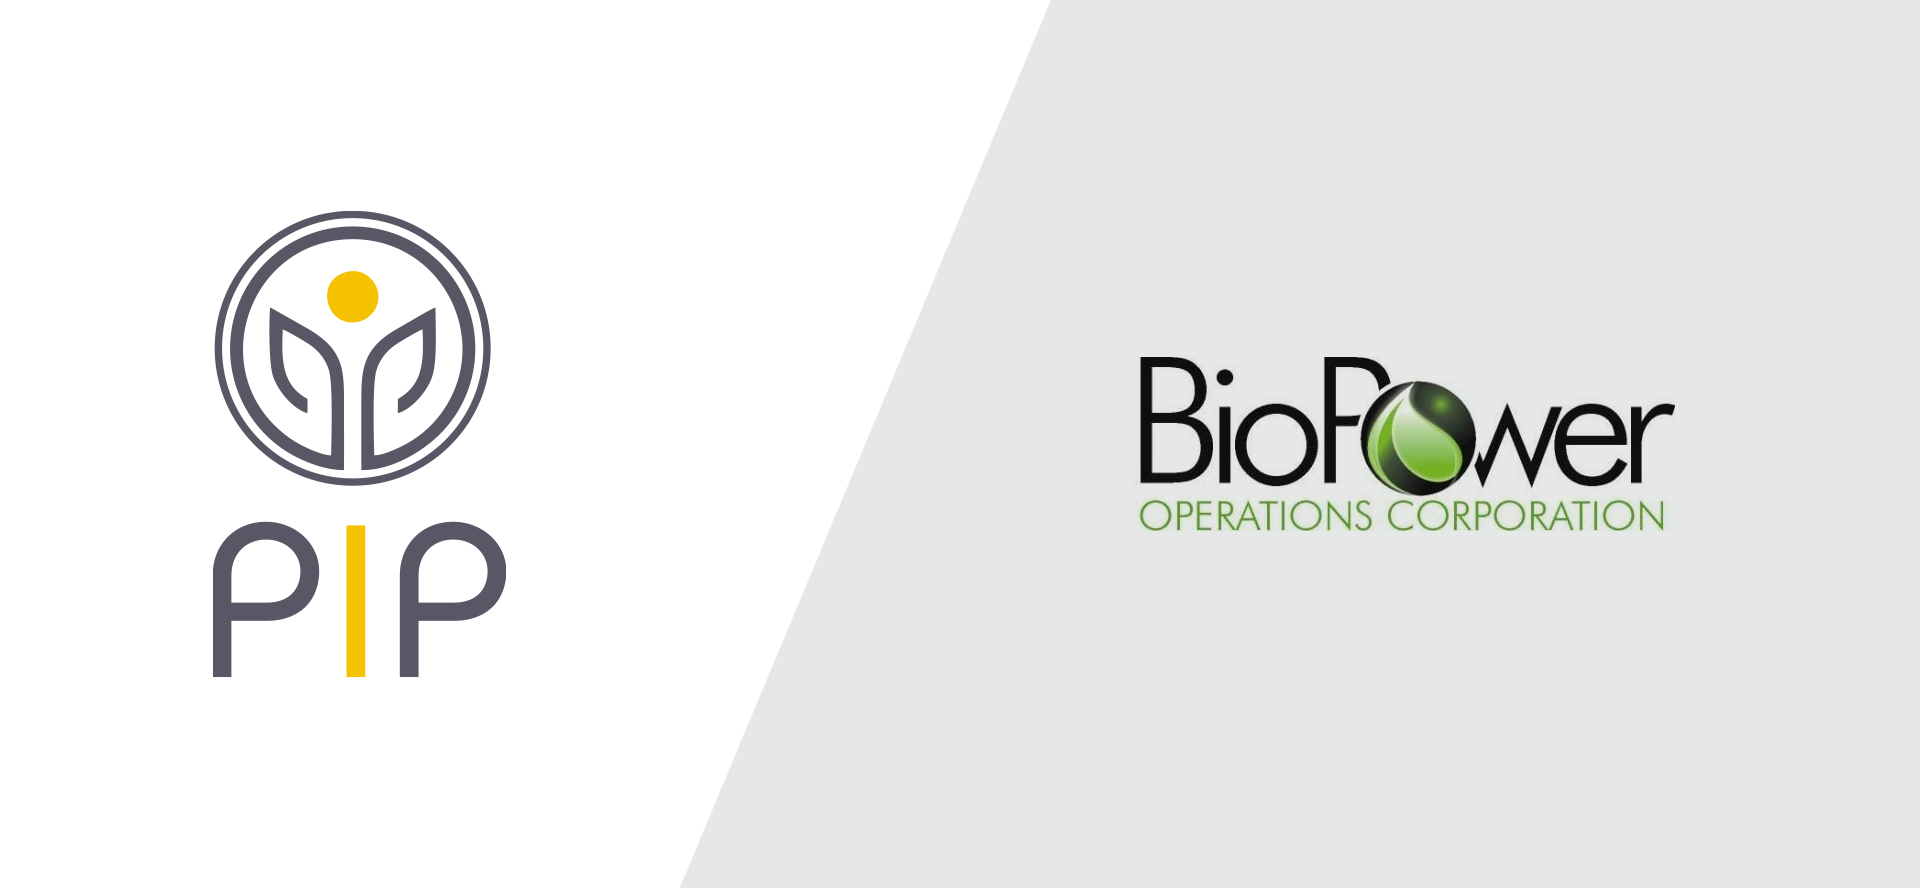 BioPower Operations Corporation (BOPO – OTC) announces entering into multiple agreements with PIP North America Inc of Canada, that includes technology licensing options for HyFi’s Vault and DeFi marketplaces and stock and token purchases.